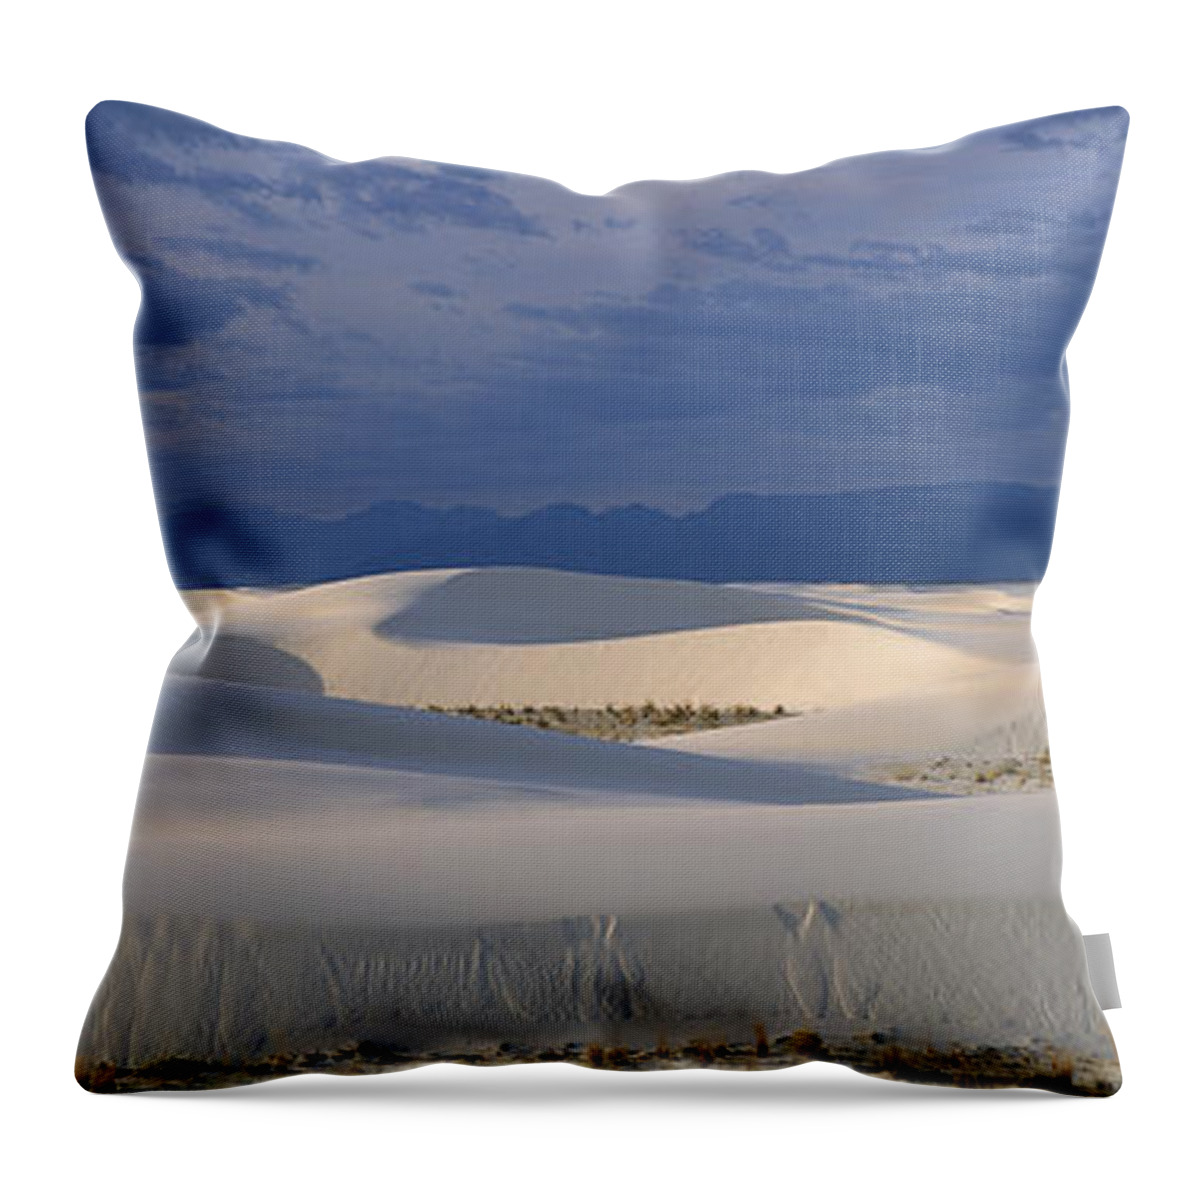 Feb0514 Throw Pillow featuring the photograph Soaptree Yucca In Gypsum Dunes White by Konrad Wothe